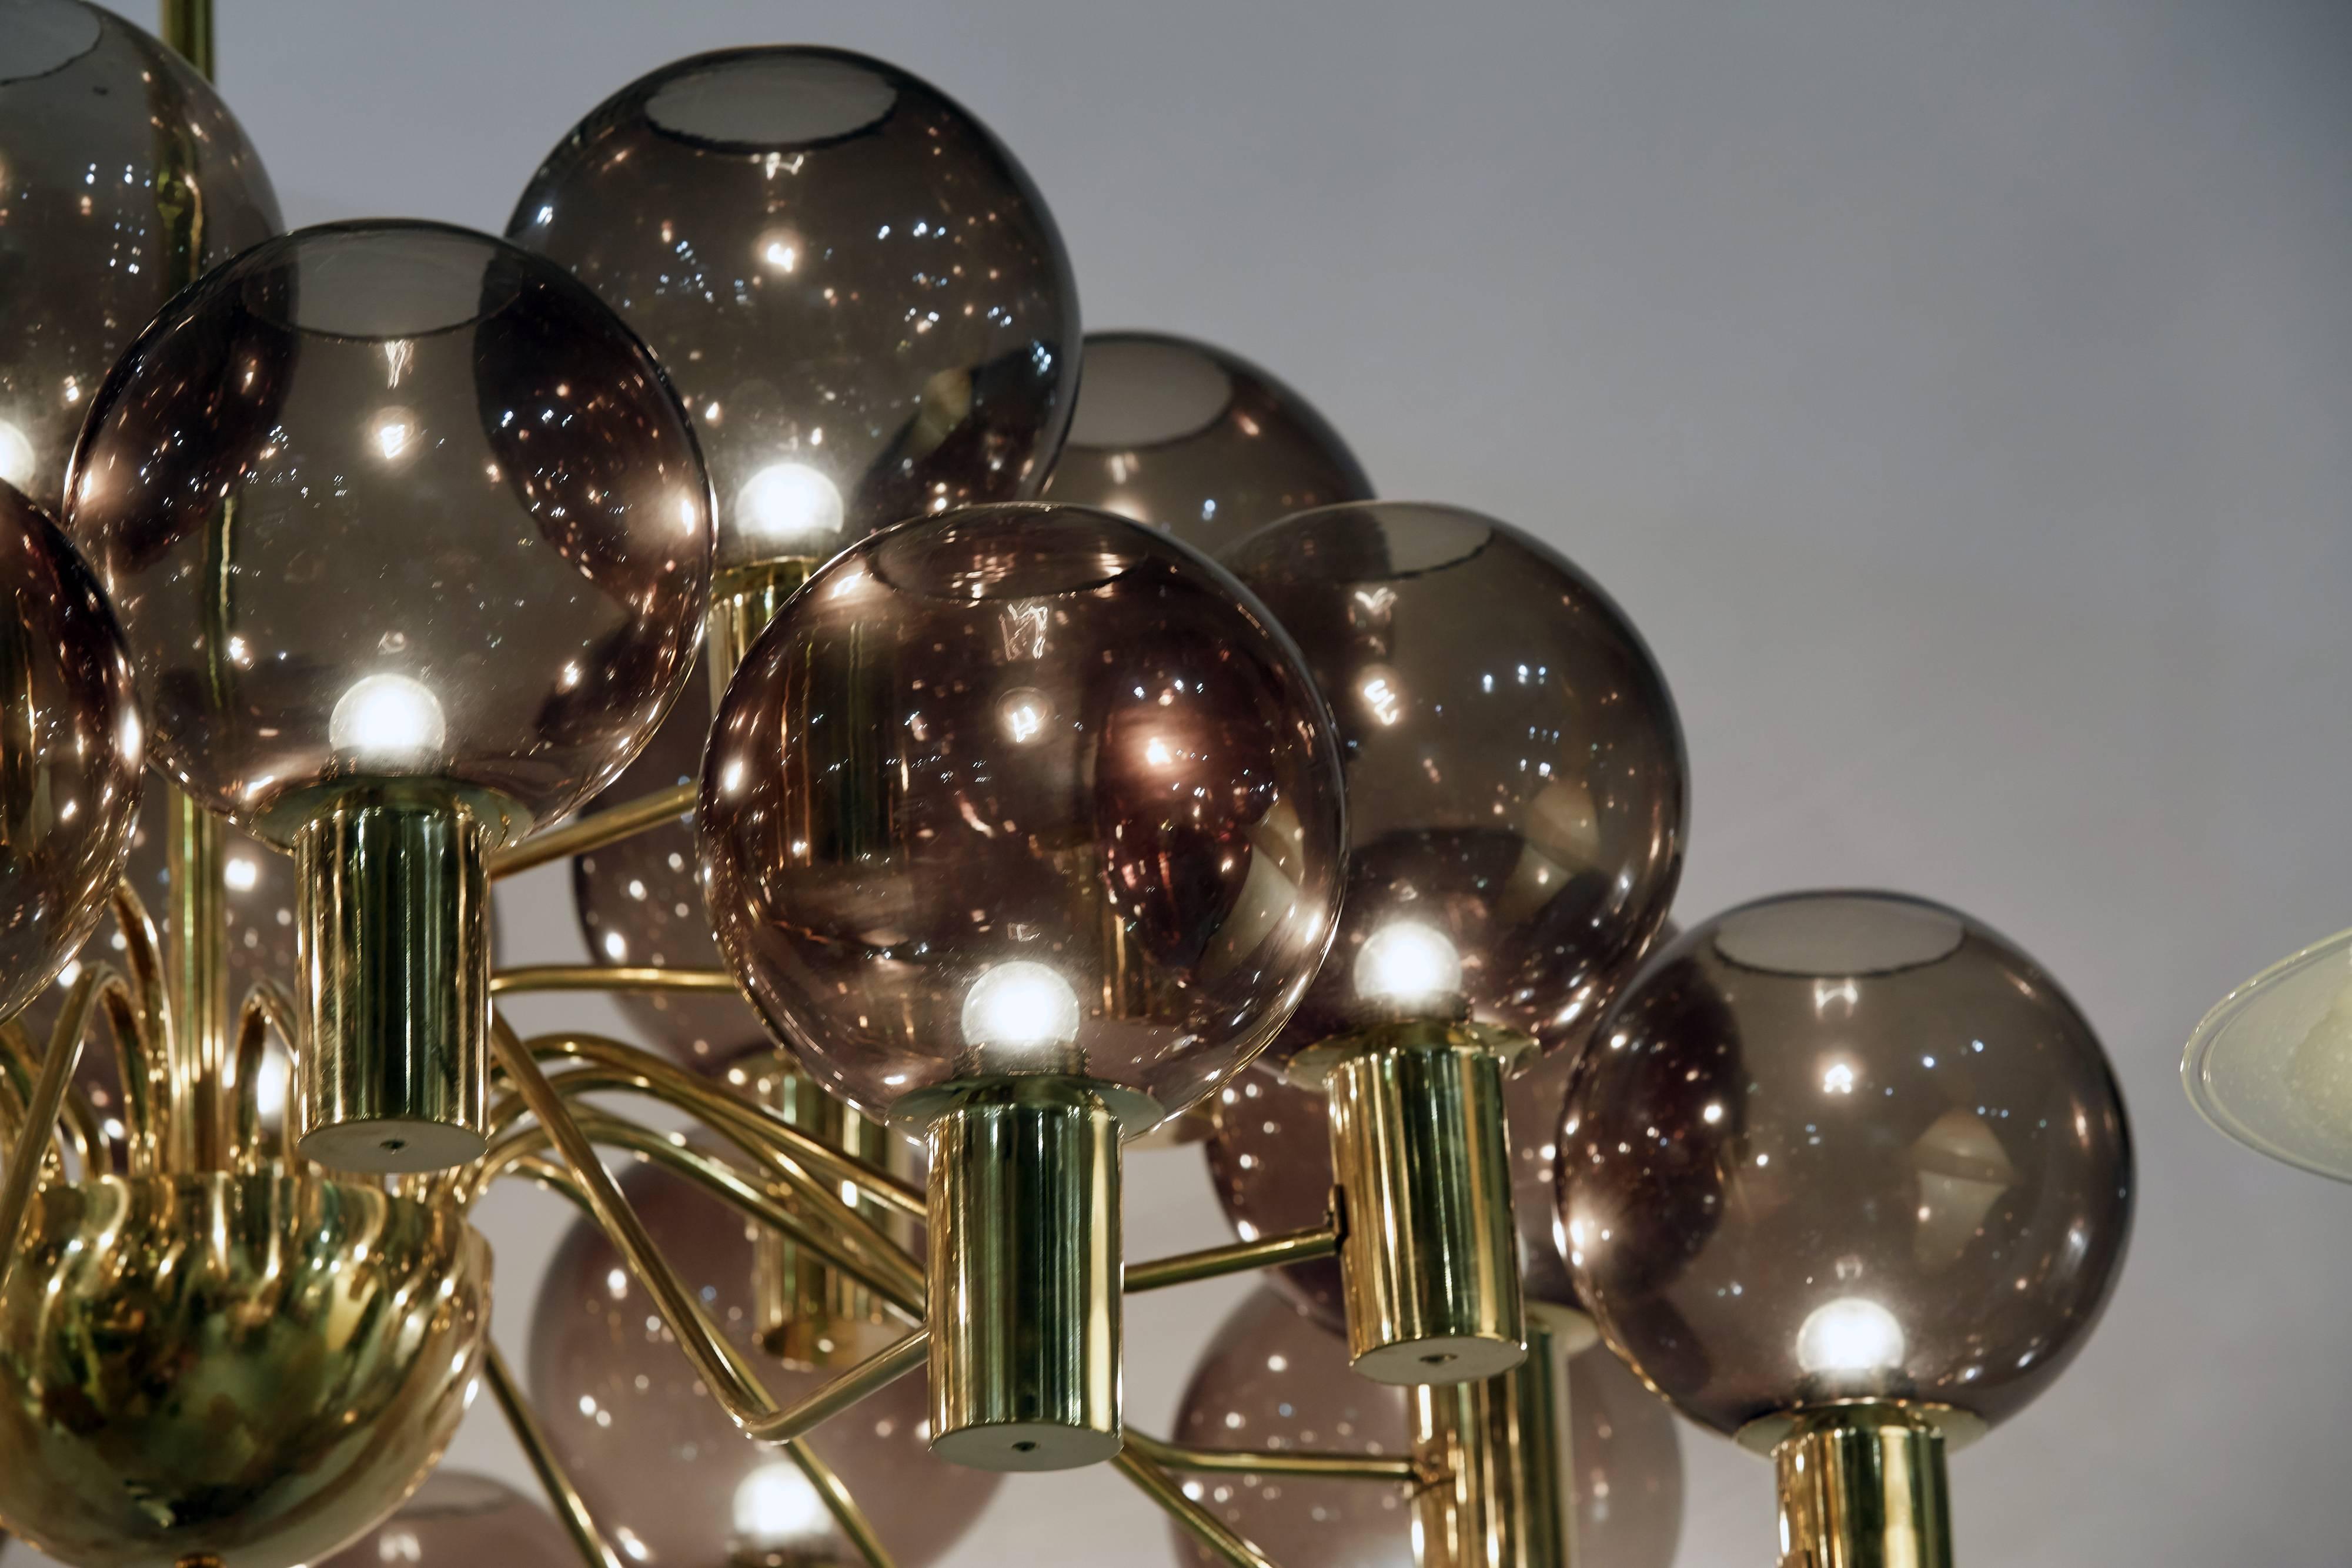 20th Century Large Swedish Mid-Century Modern Chandelier Attributed to Hans-Agne Jacobsson